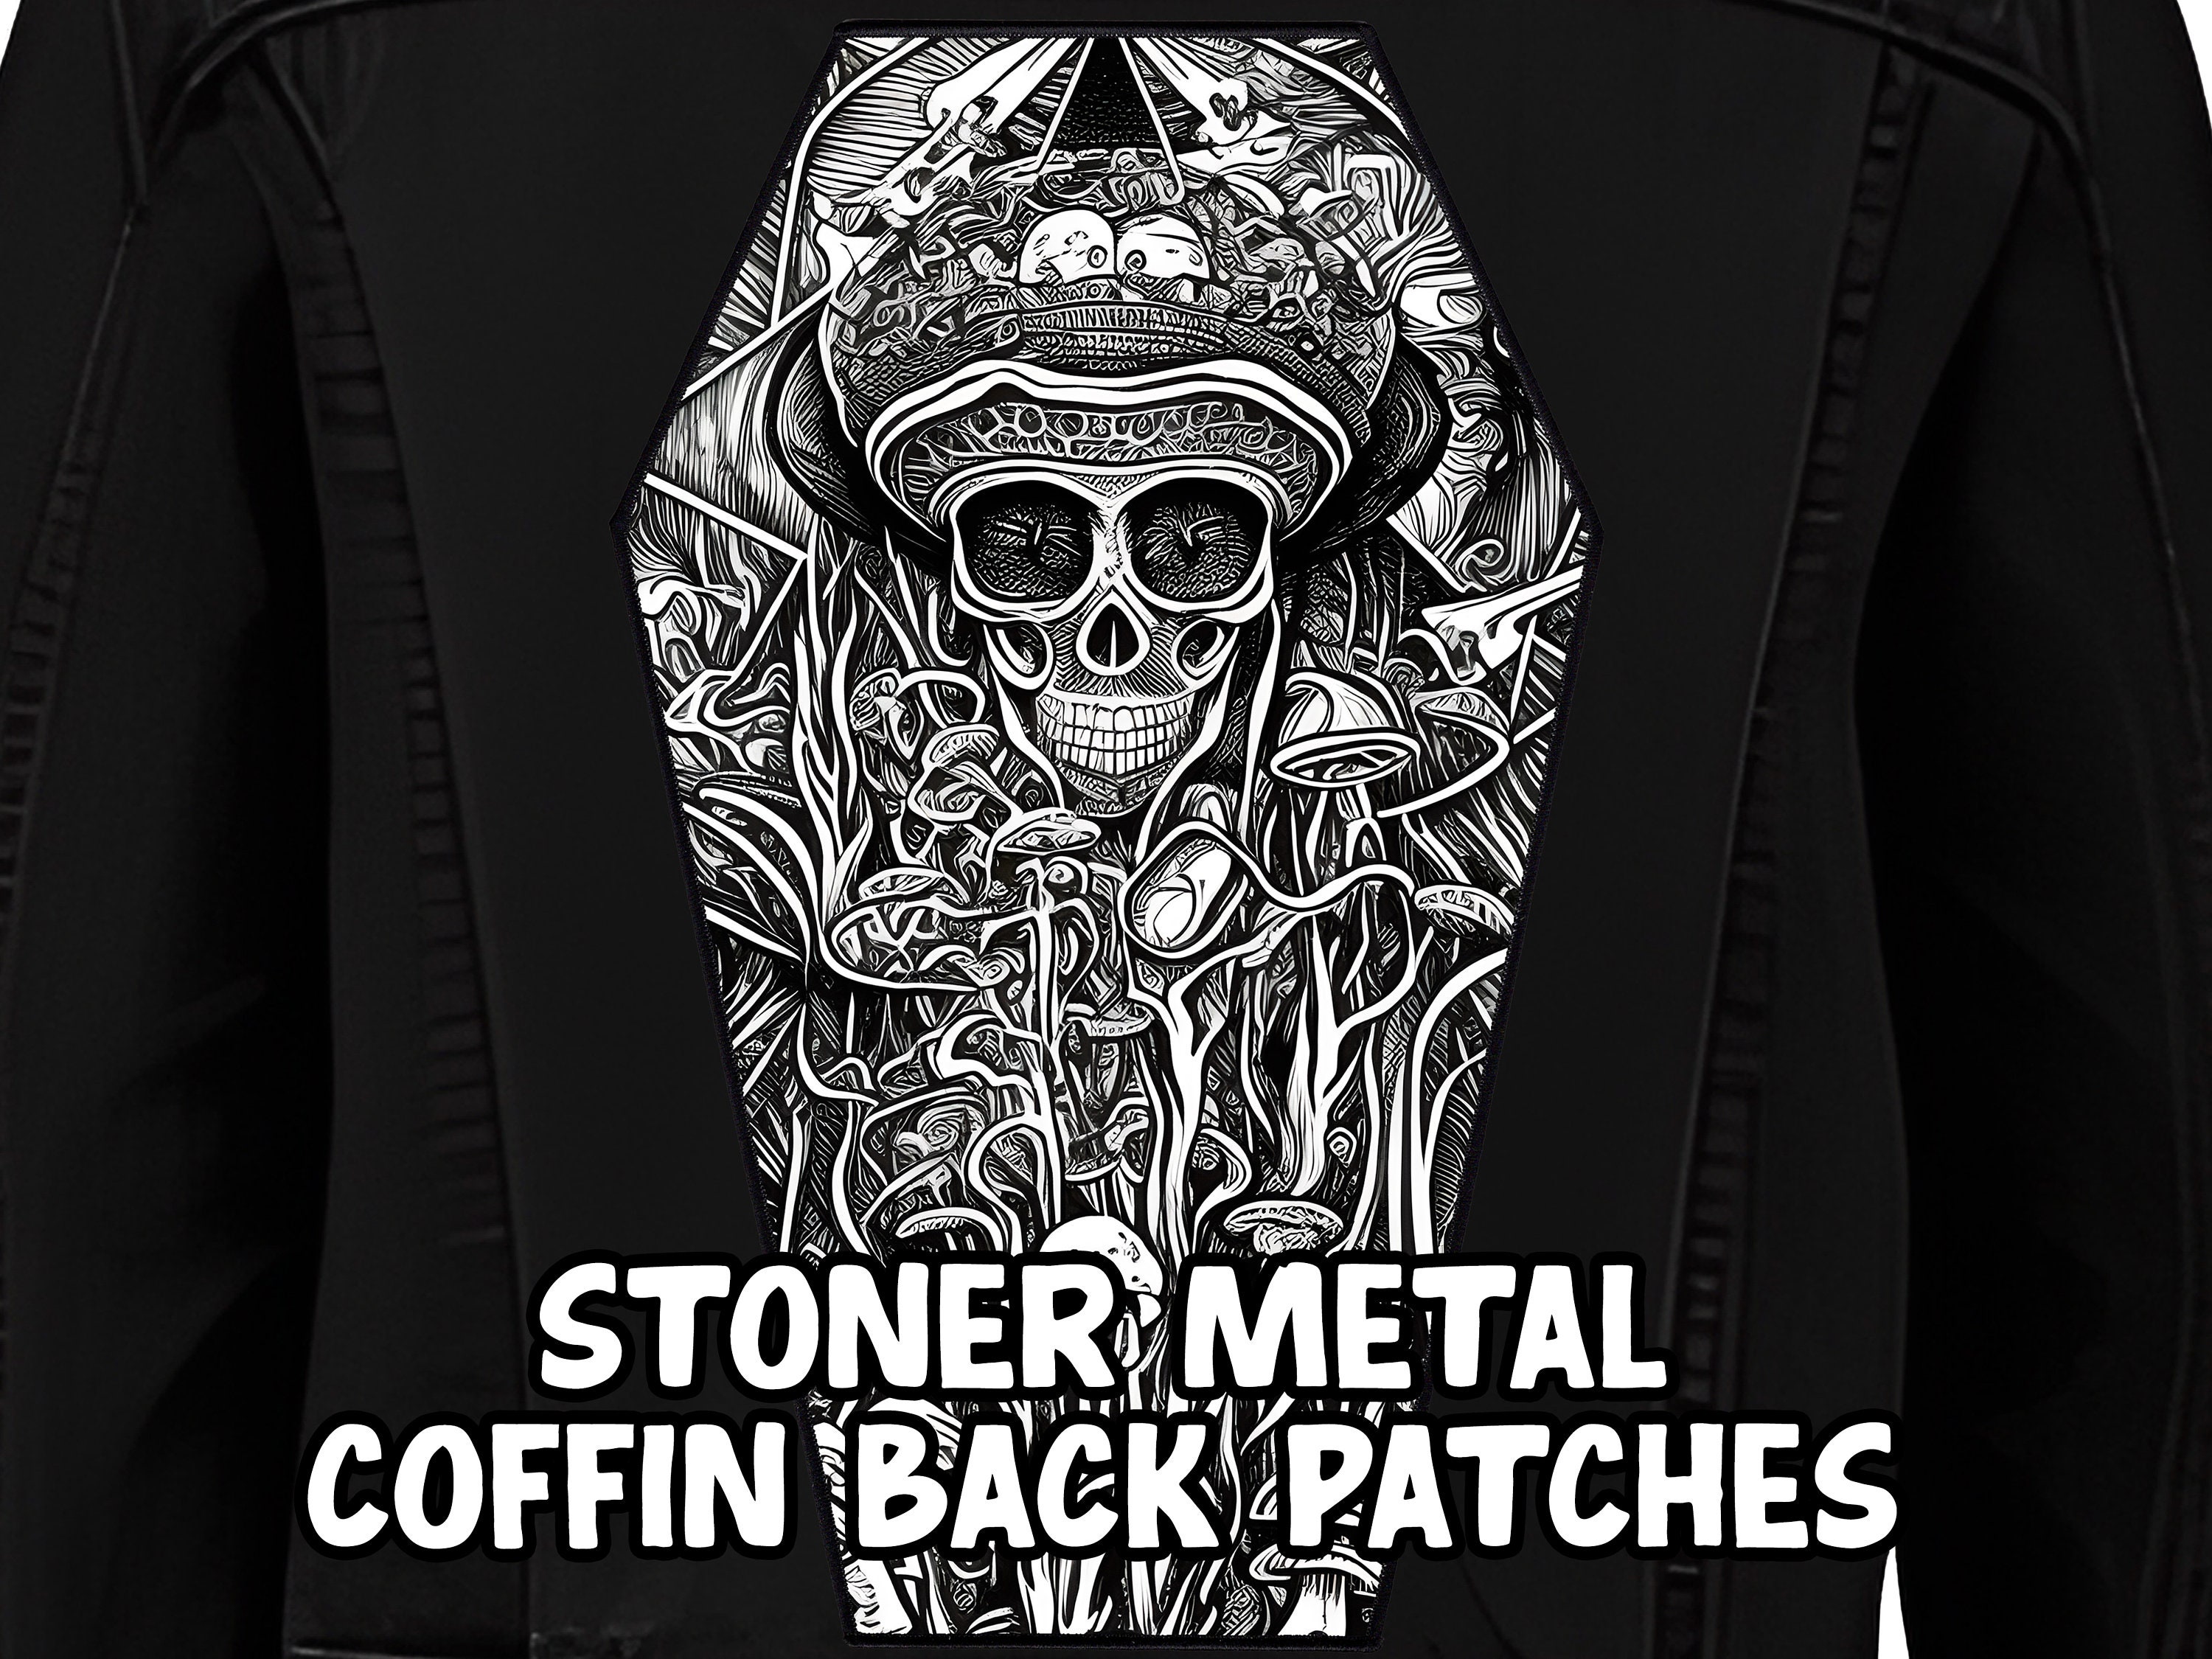 14 Sew Iron on Patch Rock Punk Metal & Grunge Patches For Clothing Jacket